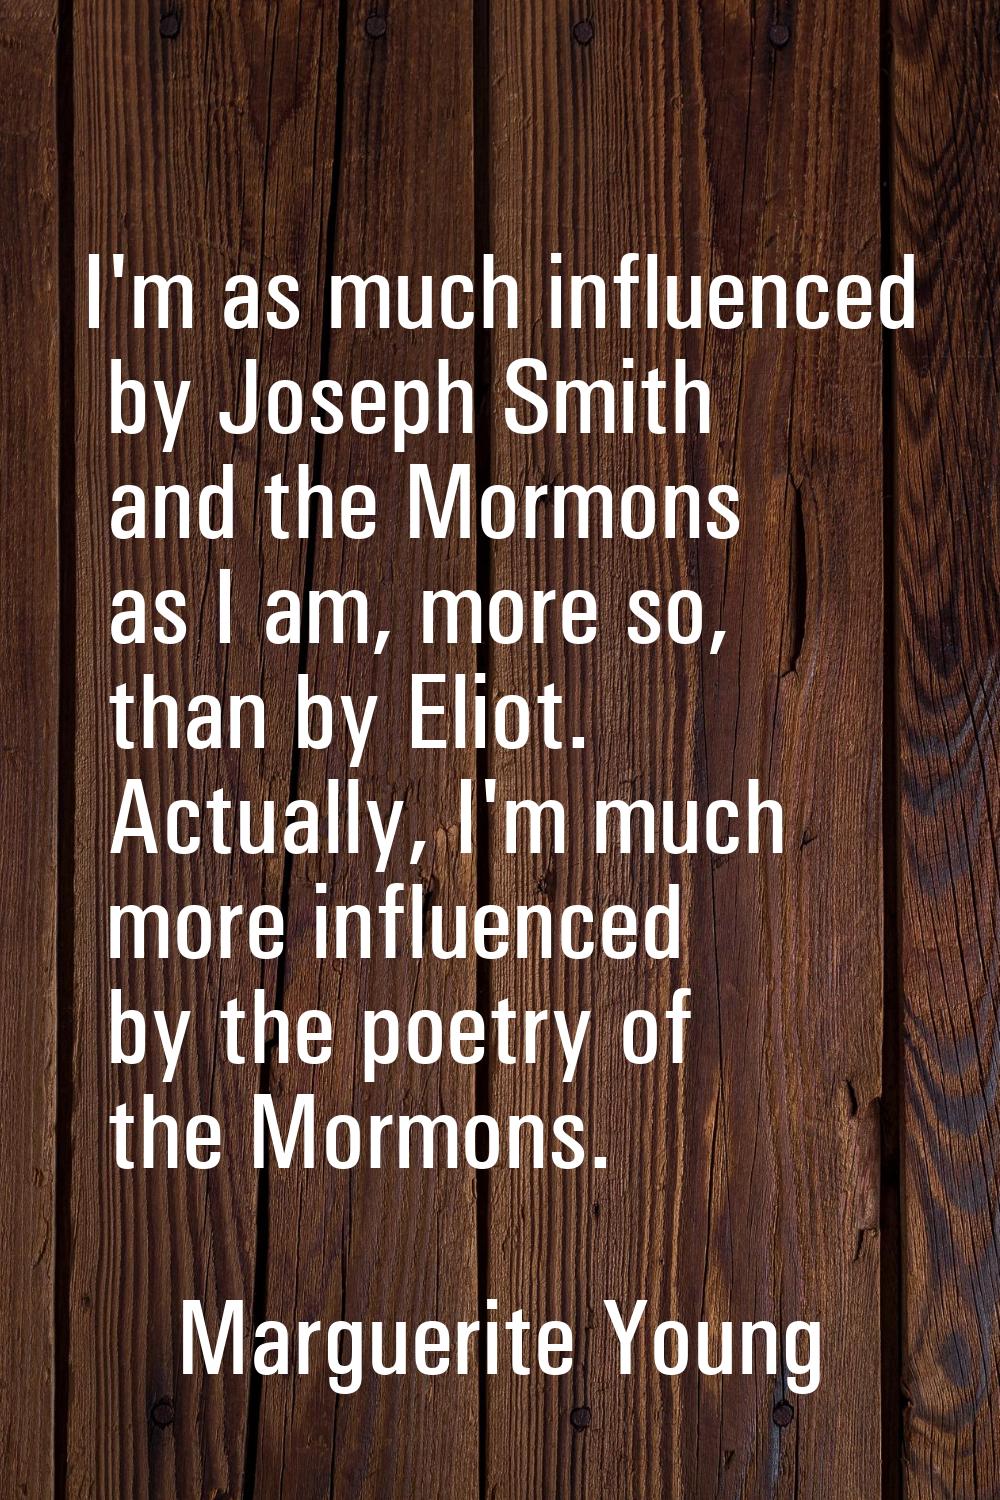 I'm as much influenced by Joseph Smith and the Mormons as I am, more so, than by Eliot. Actually, I